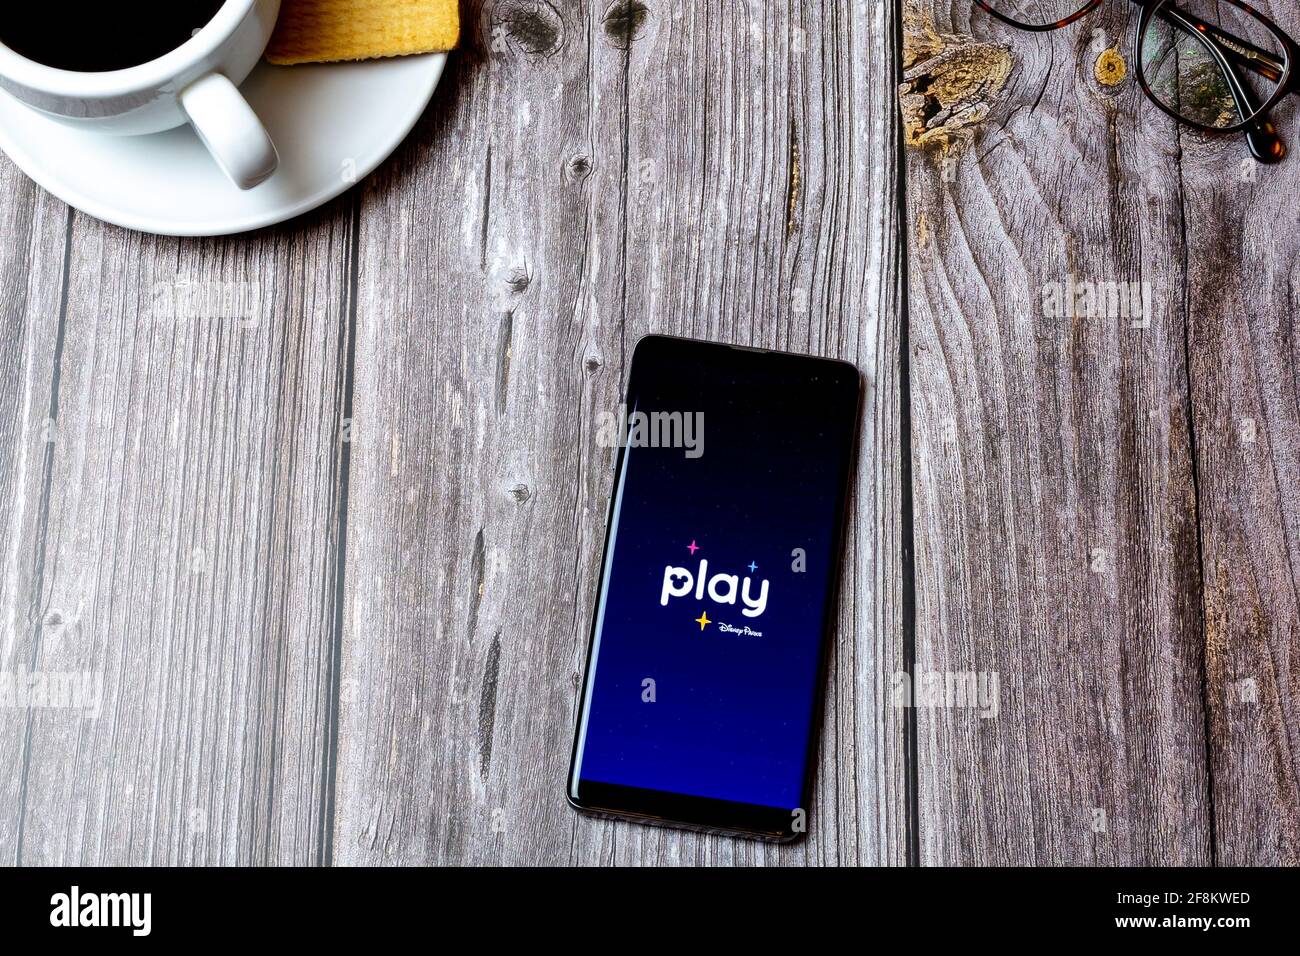 A Mobile phone or cell phone laid on a wooden table showing the Play disney Parks app on screen Stock Photo